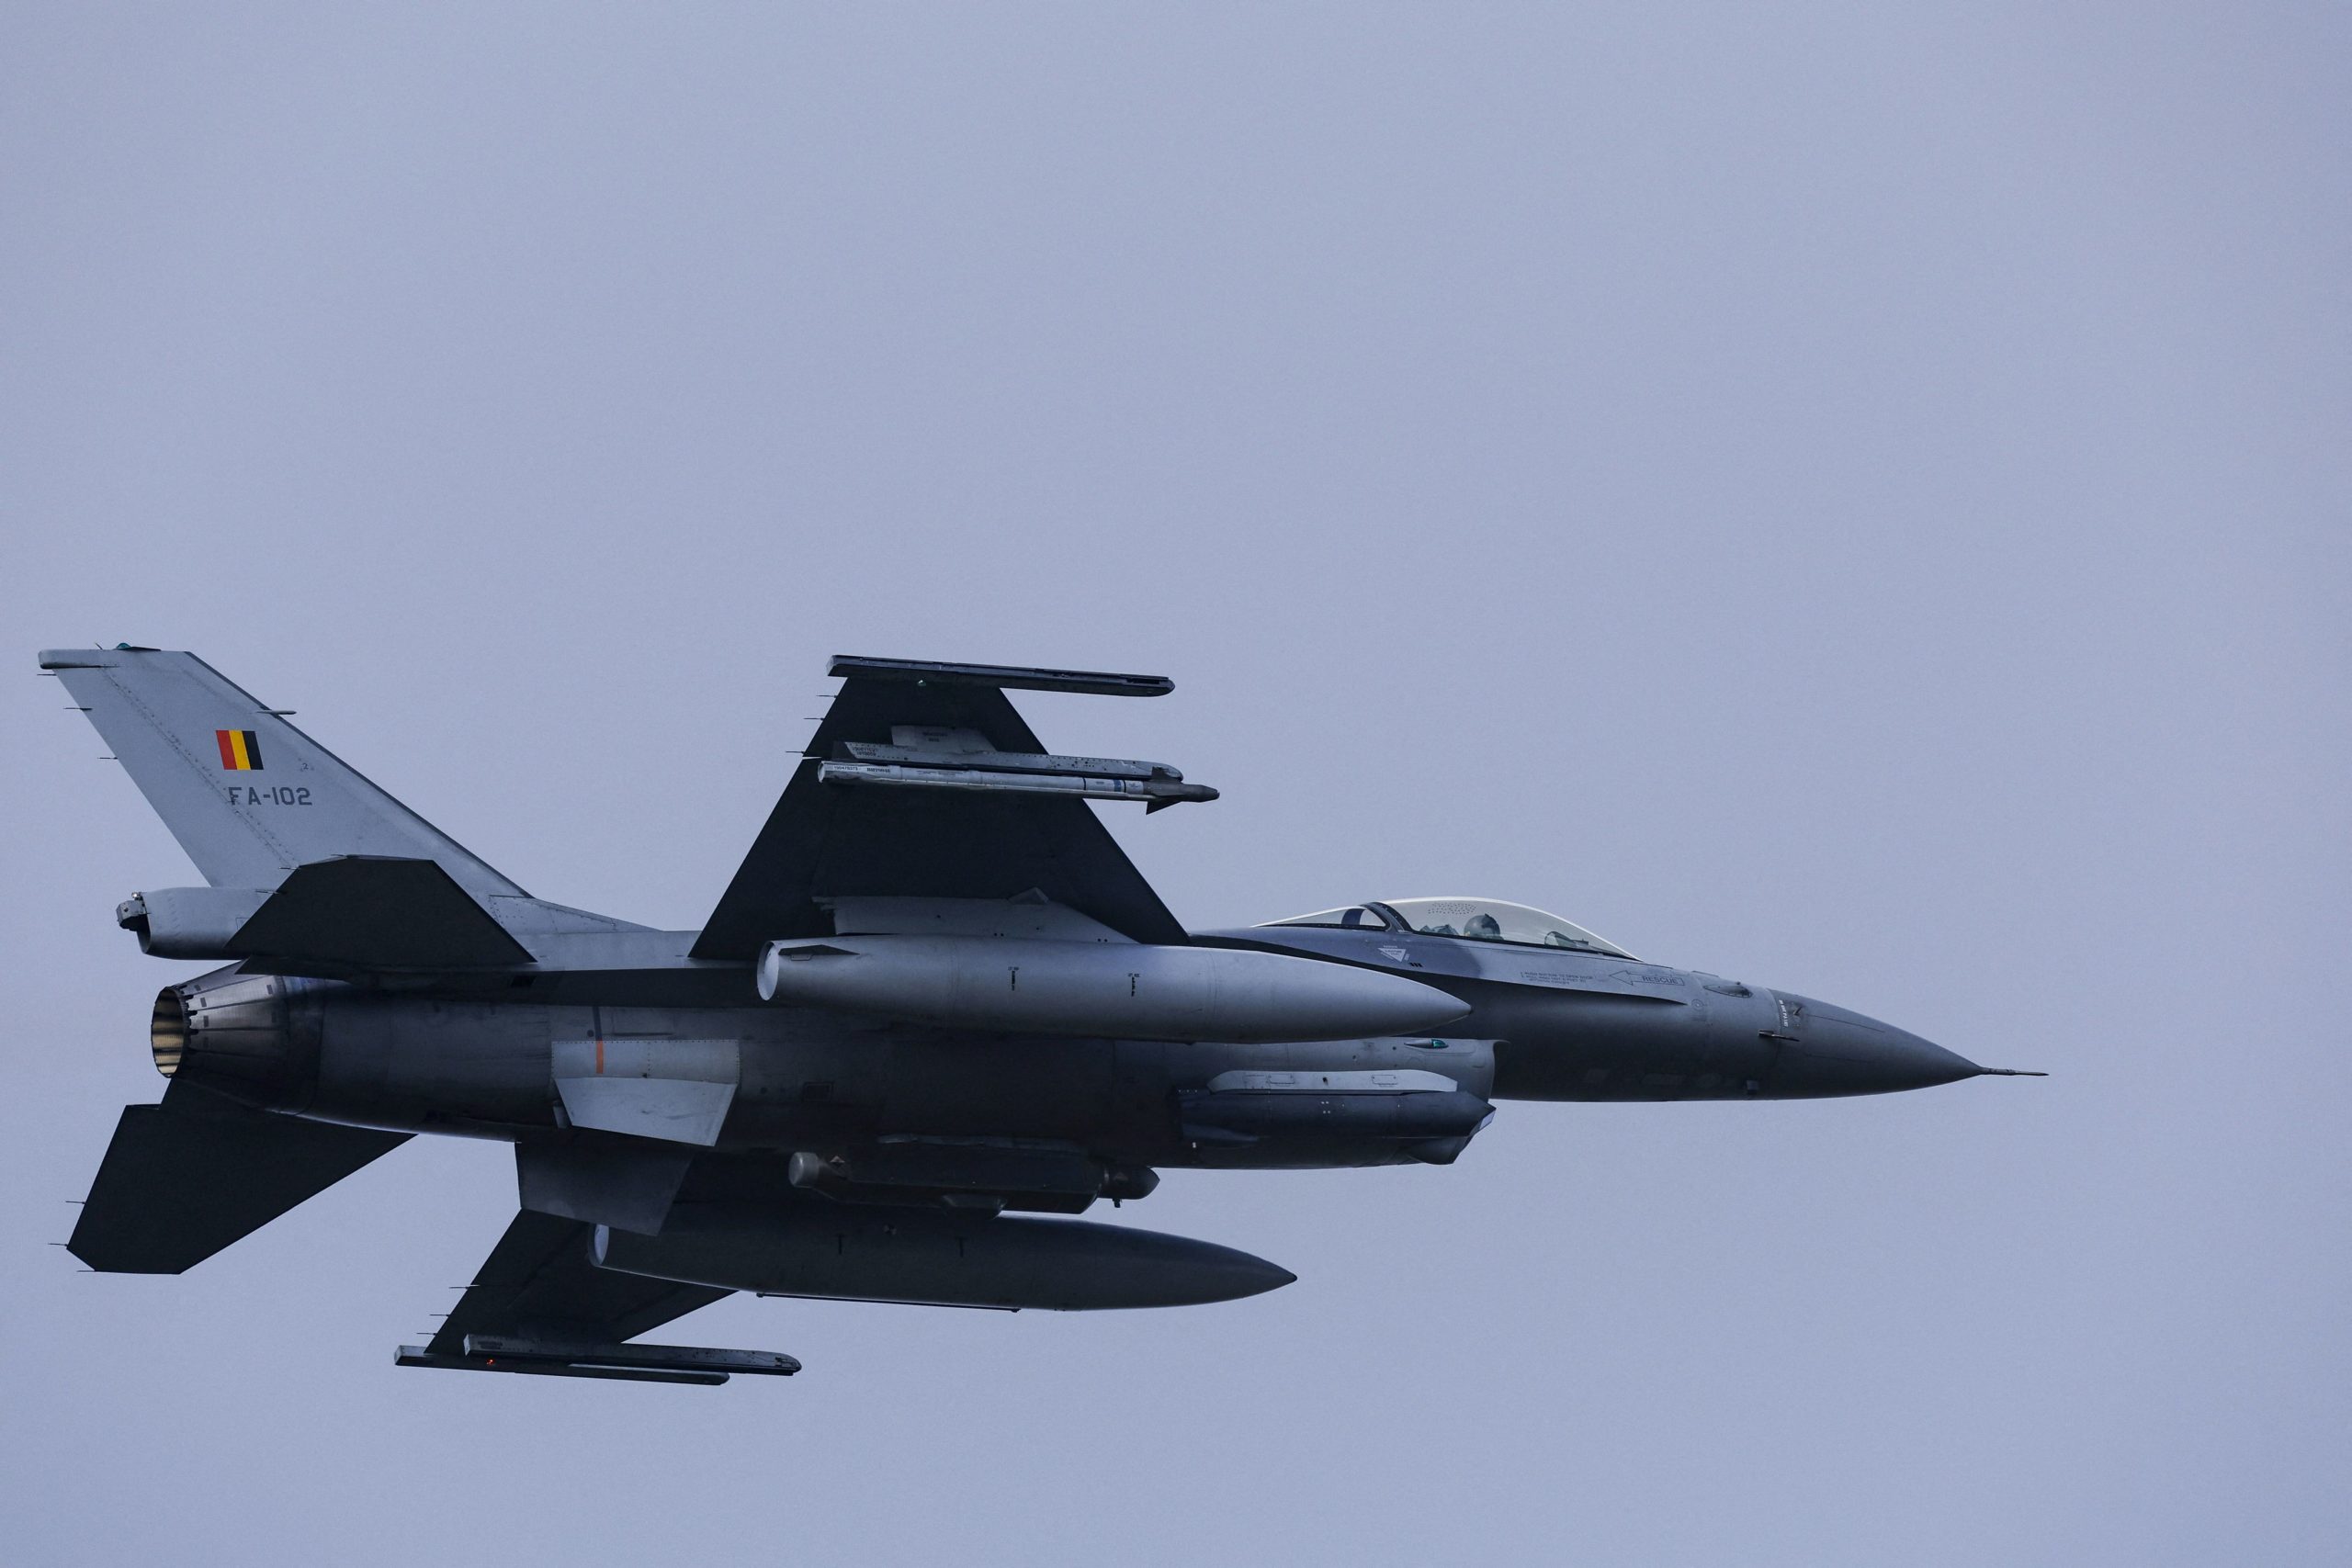 A Belgian F-16 jet fighter takes part in the NATO Air Nuclear drill "Steadfast Noon" (its regular nuclear deterrence exercise) at the Kleine-Brogel air base in Belgium on October 18, 2022. - NATO on October 17, 2022 launched its regular nuclear deterrence drills in western Europe, after tensions soared with Russia over President Vladimir Putin's veiled threats in the face of setbacks in Ukraine. The 30-nation alliance has stressed that the "routine, recurring training activity" -- which runs until October 30 -- was planned before Moscow invaded Ukraine and is not linked to the current situation.